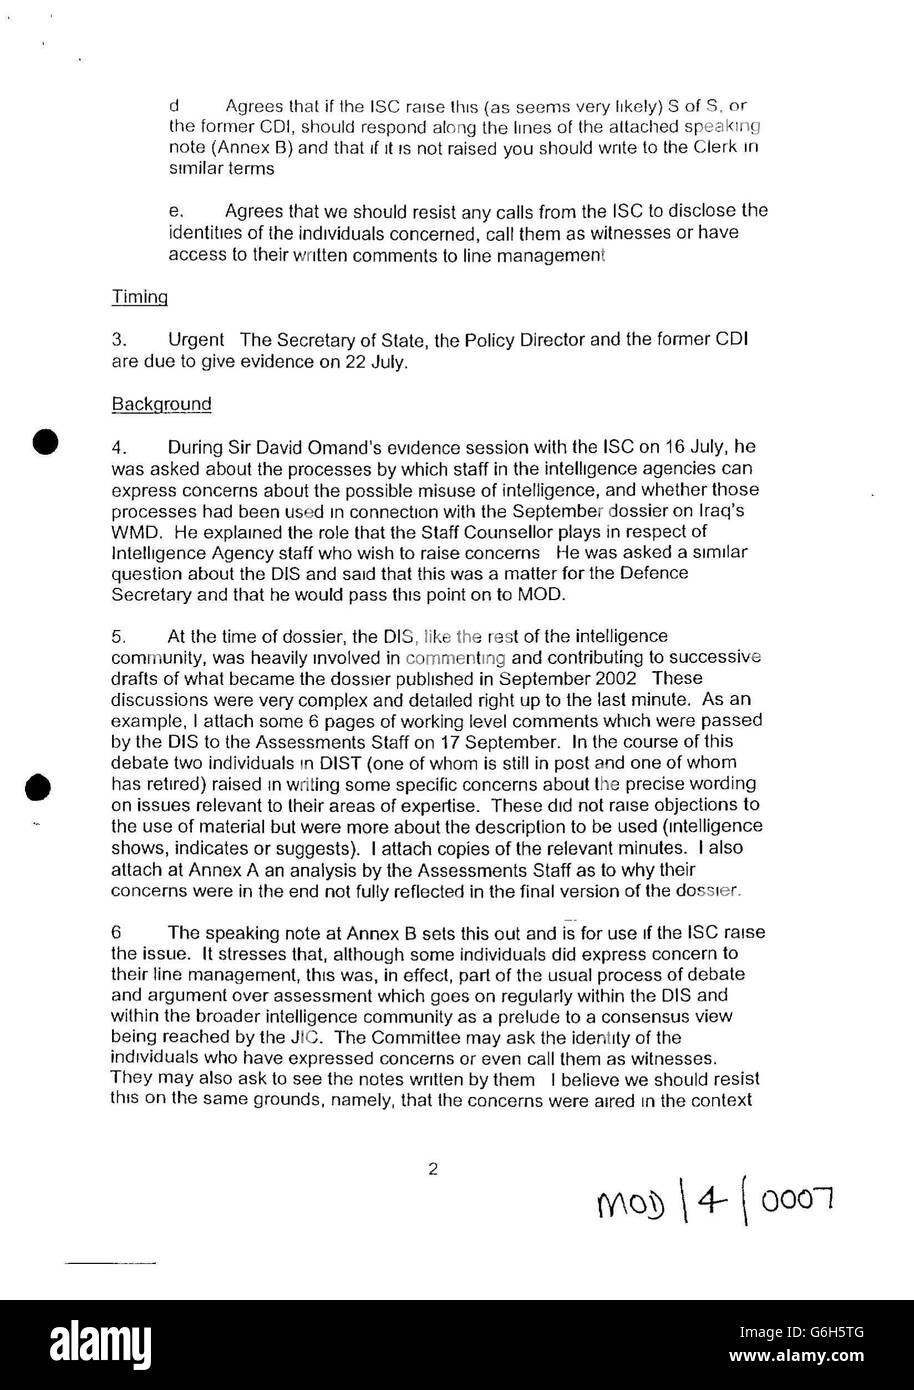 A page (2 of 3) of a memo from the deputy chief of defence intelligence Martin Howard, released to the Hutton inquiry, which states: 'The ISC is likely to probe the Secretary of State ... about the process through which members of DIS can express concerns about the misuse of intelligence.' Defence Secretary Geoff Hoon is facing accusations of giving 'misleading' evidence to a Parliamentary inquiry into Iraqi weapons of mass destruction. The Evening Standard in London said that the Intelligence and Security Committee (ISC) will find that Mr Hoon withheld evidence from their investigation when Stock Photo